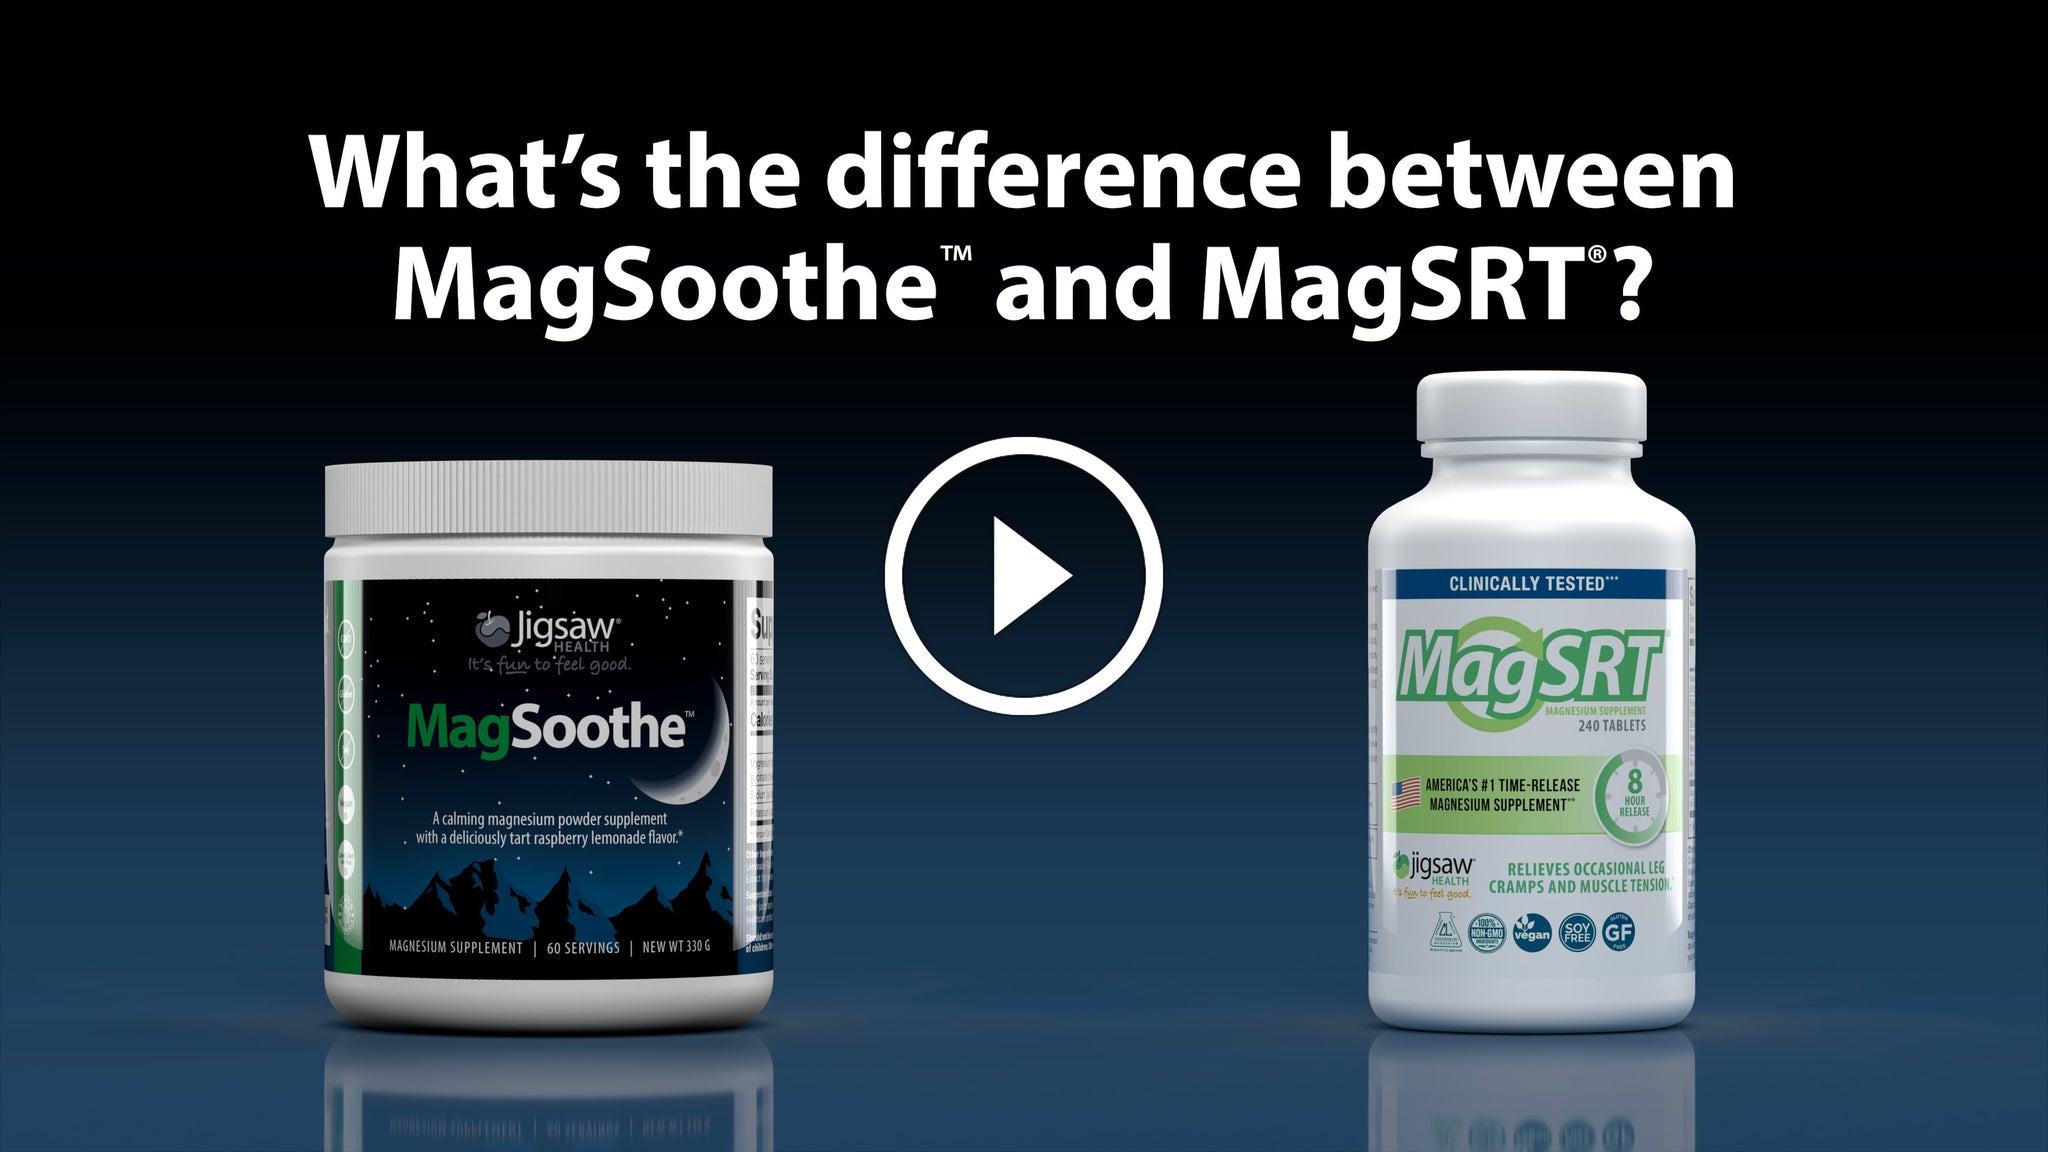 What is the Difference between MagSRT and MagSoothe?